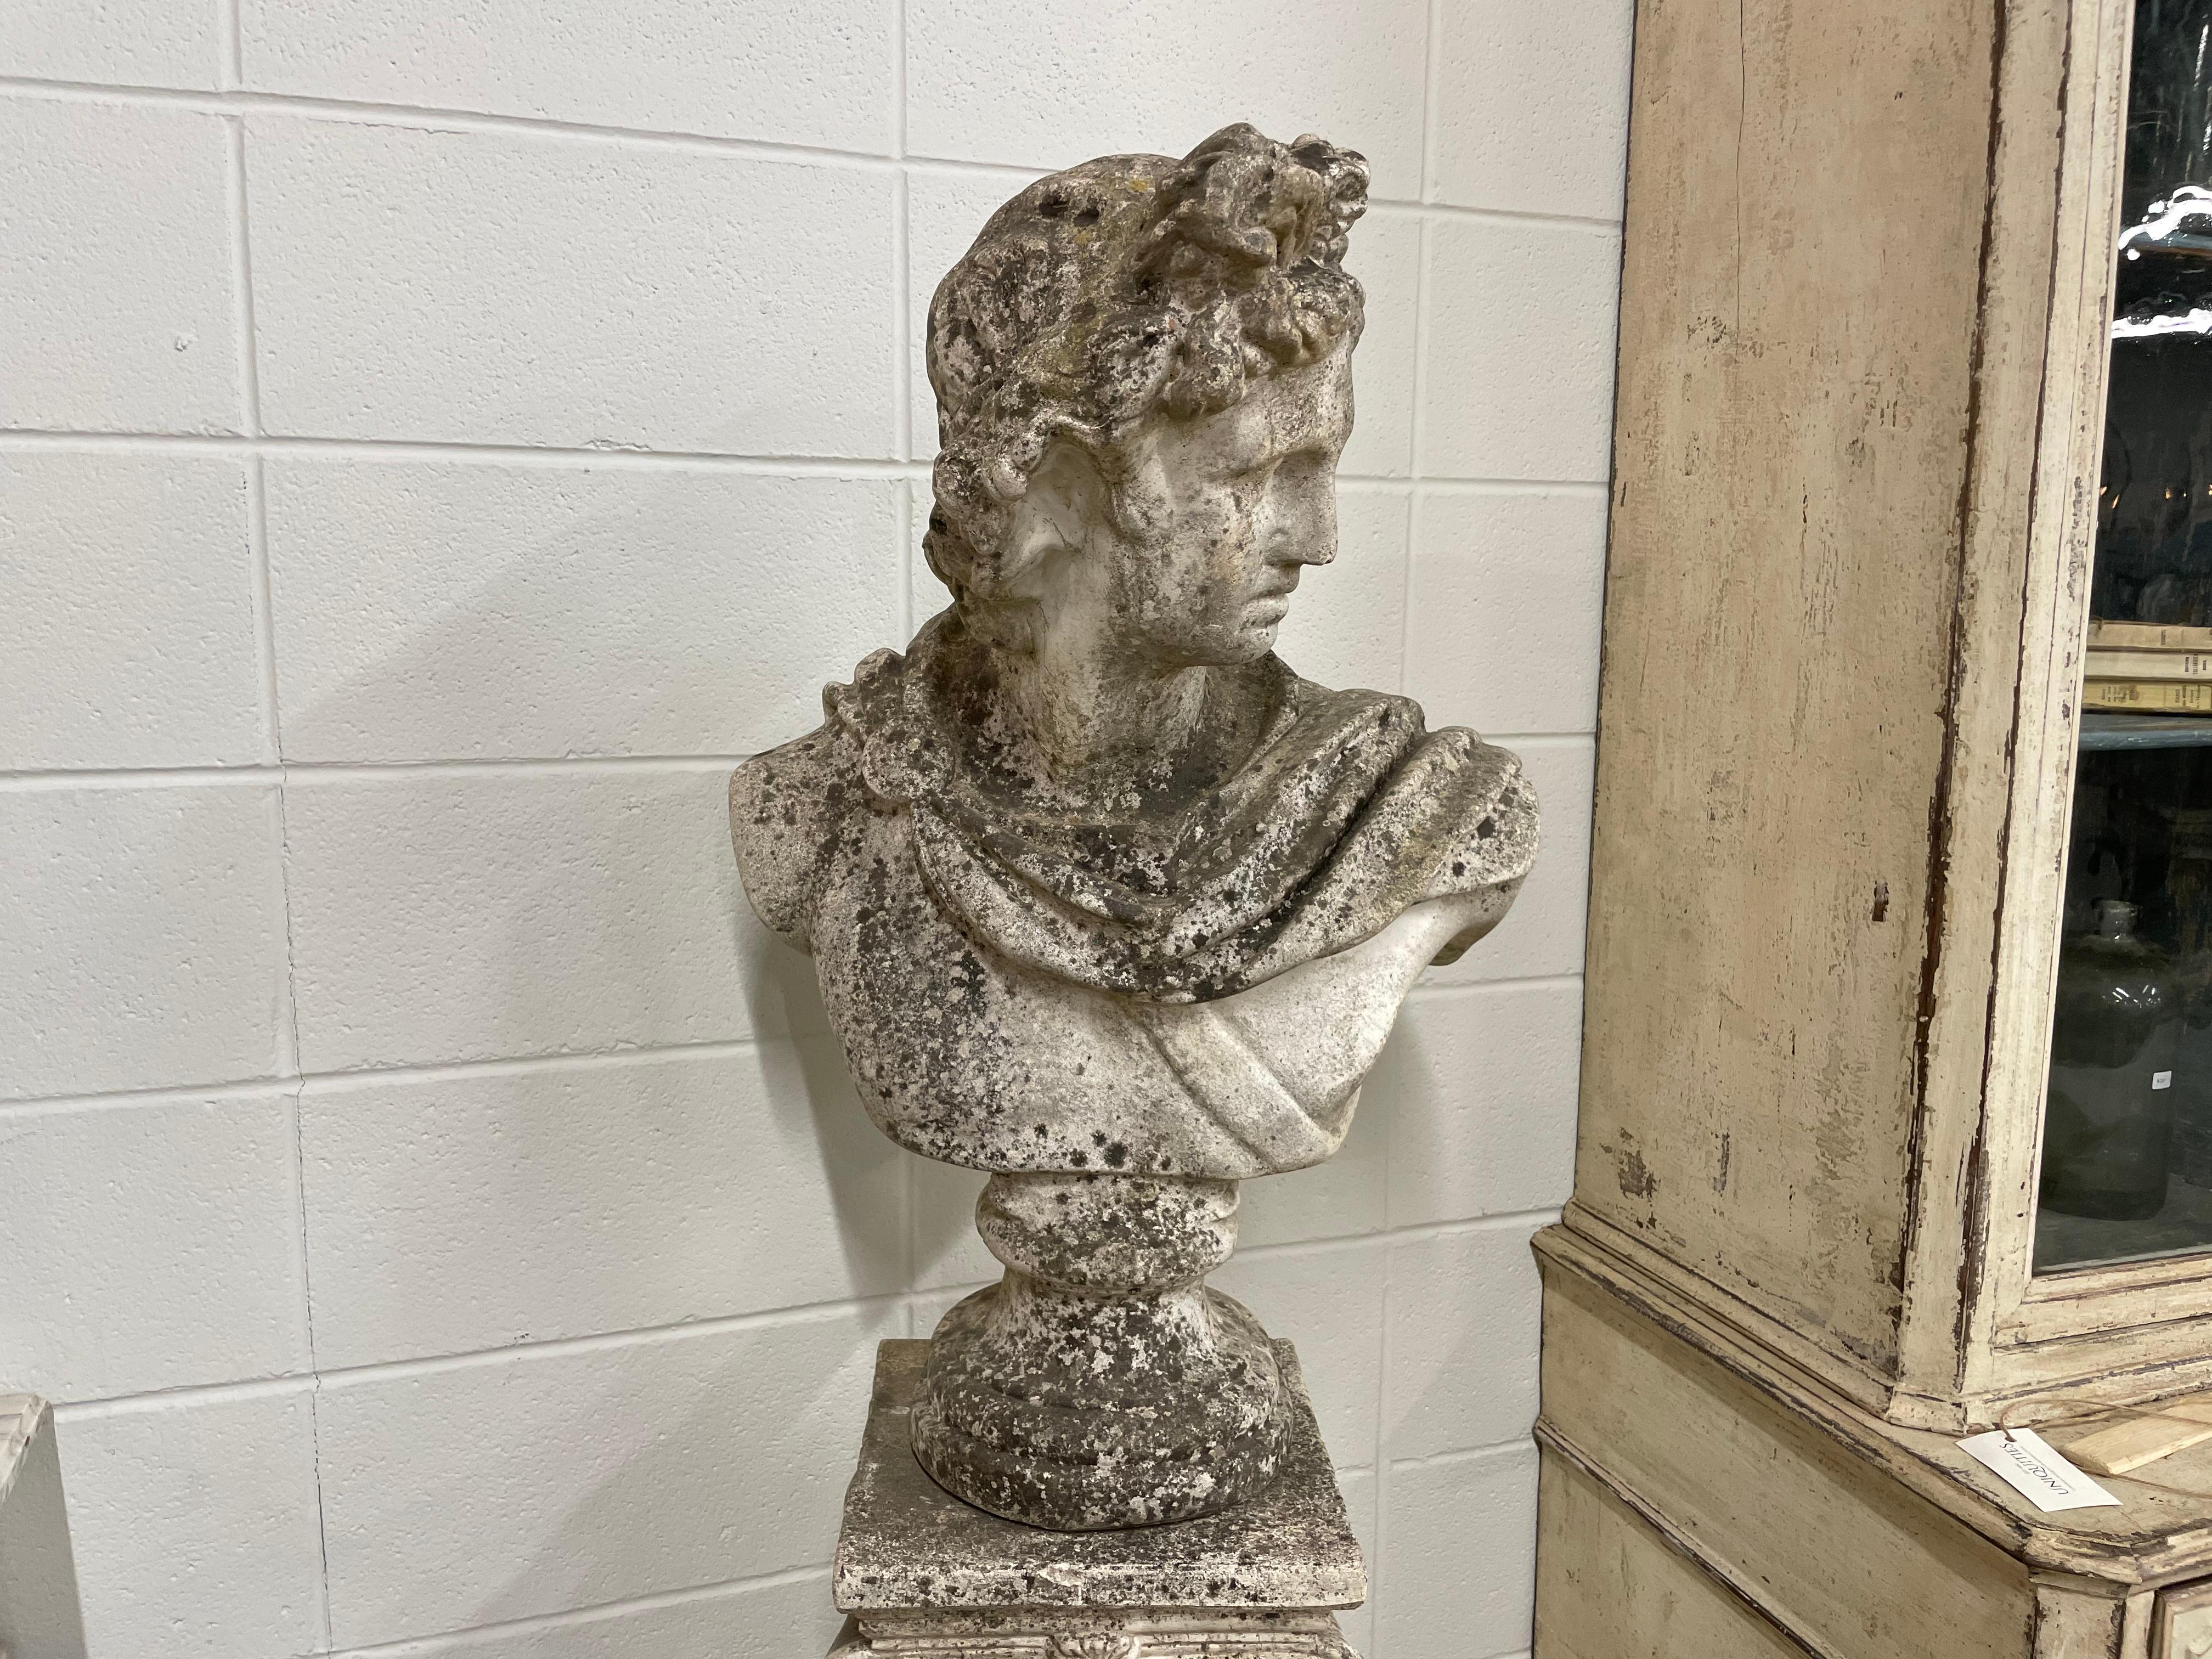 An English vintage composite stone bust after the 2nd Century Roman Apollo Belvedere atop a classical iconic fluted column. Great patina.

Wonderful piece in a library.